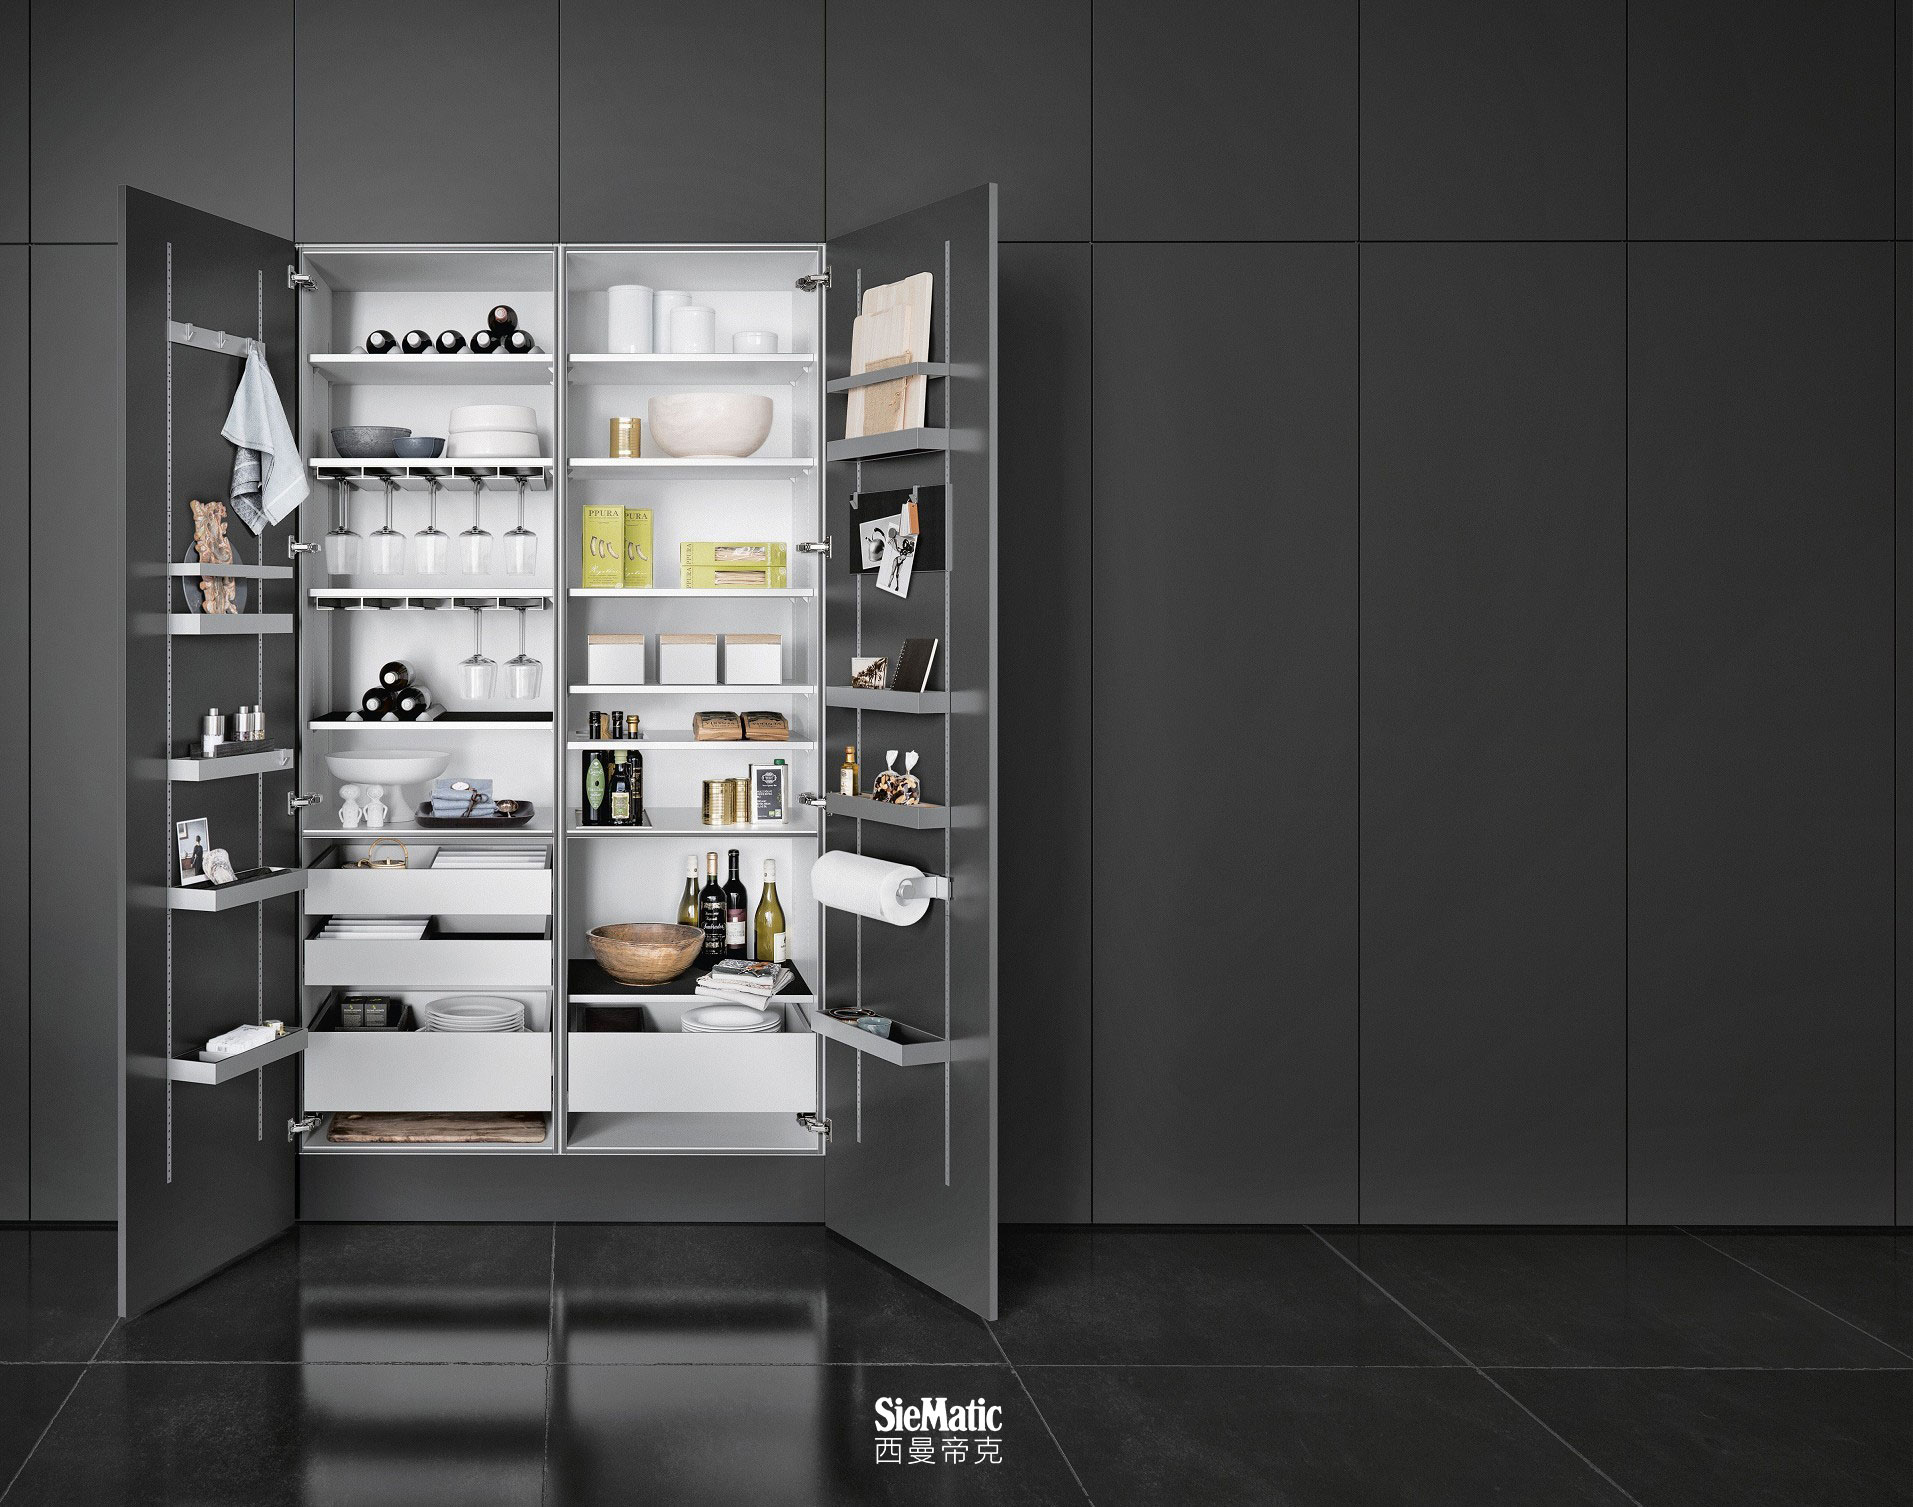 With SieMatic MultiMatic interior accessories, gain up to 30% more storage space in tall, wall and base cabinets.